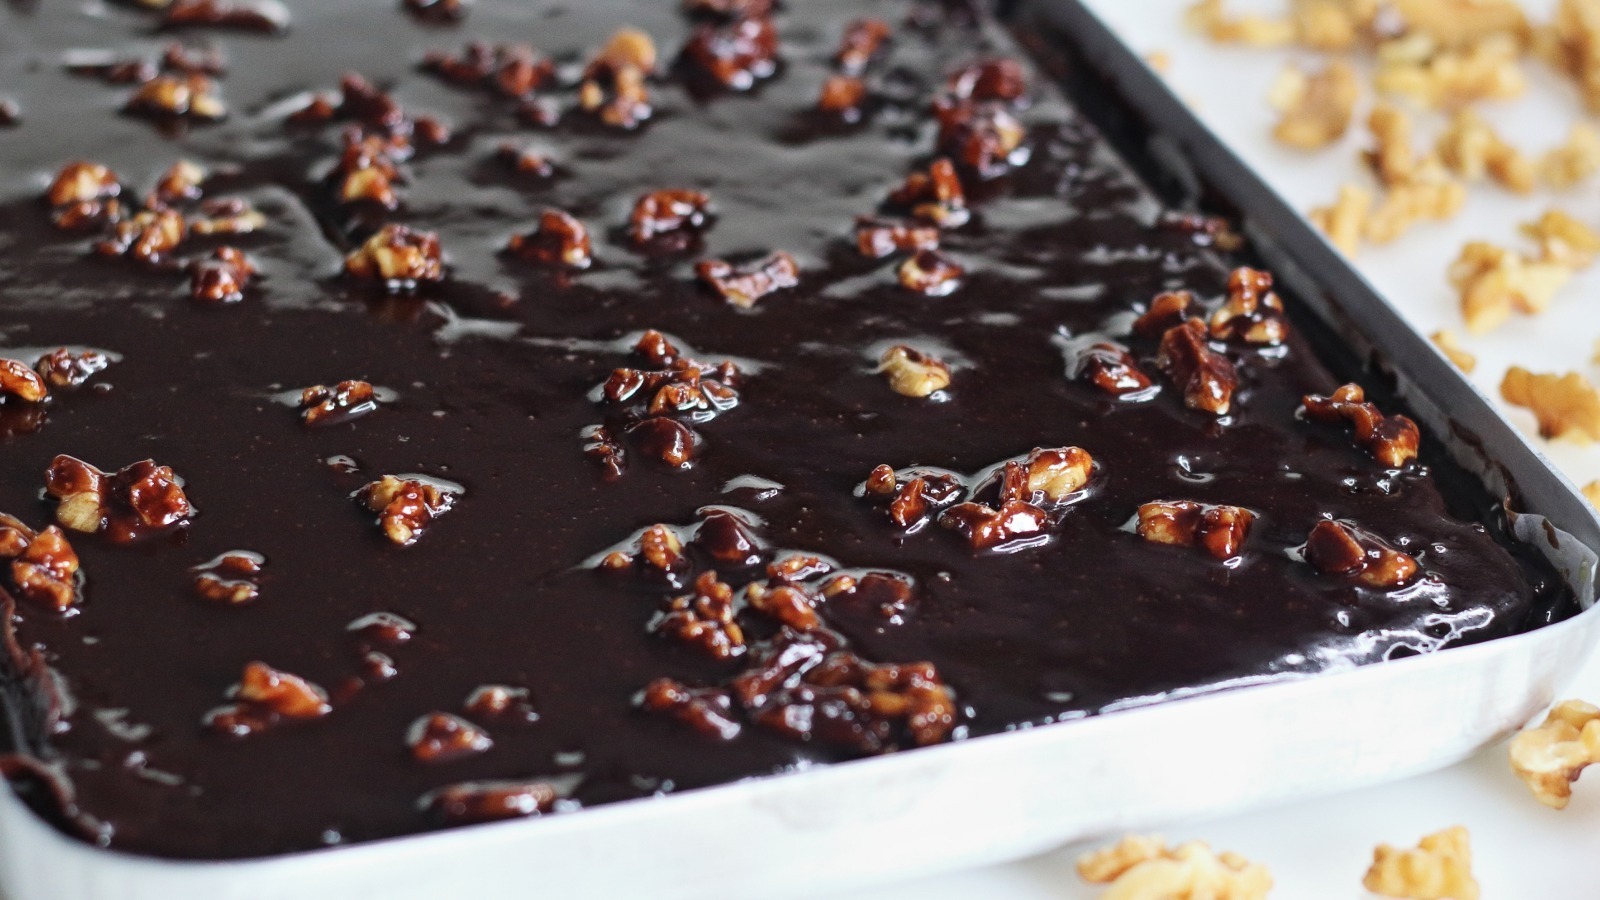 So, What Exactly Puts The Texas In Texas Sheet Cake? – Mashed